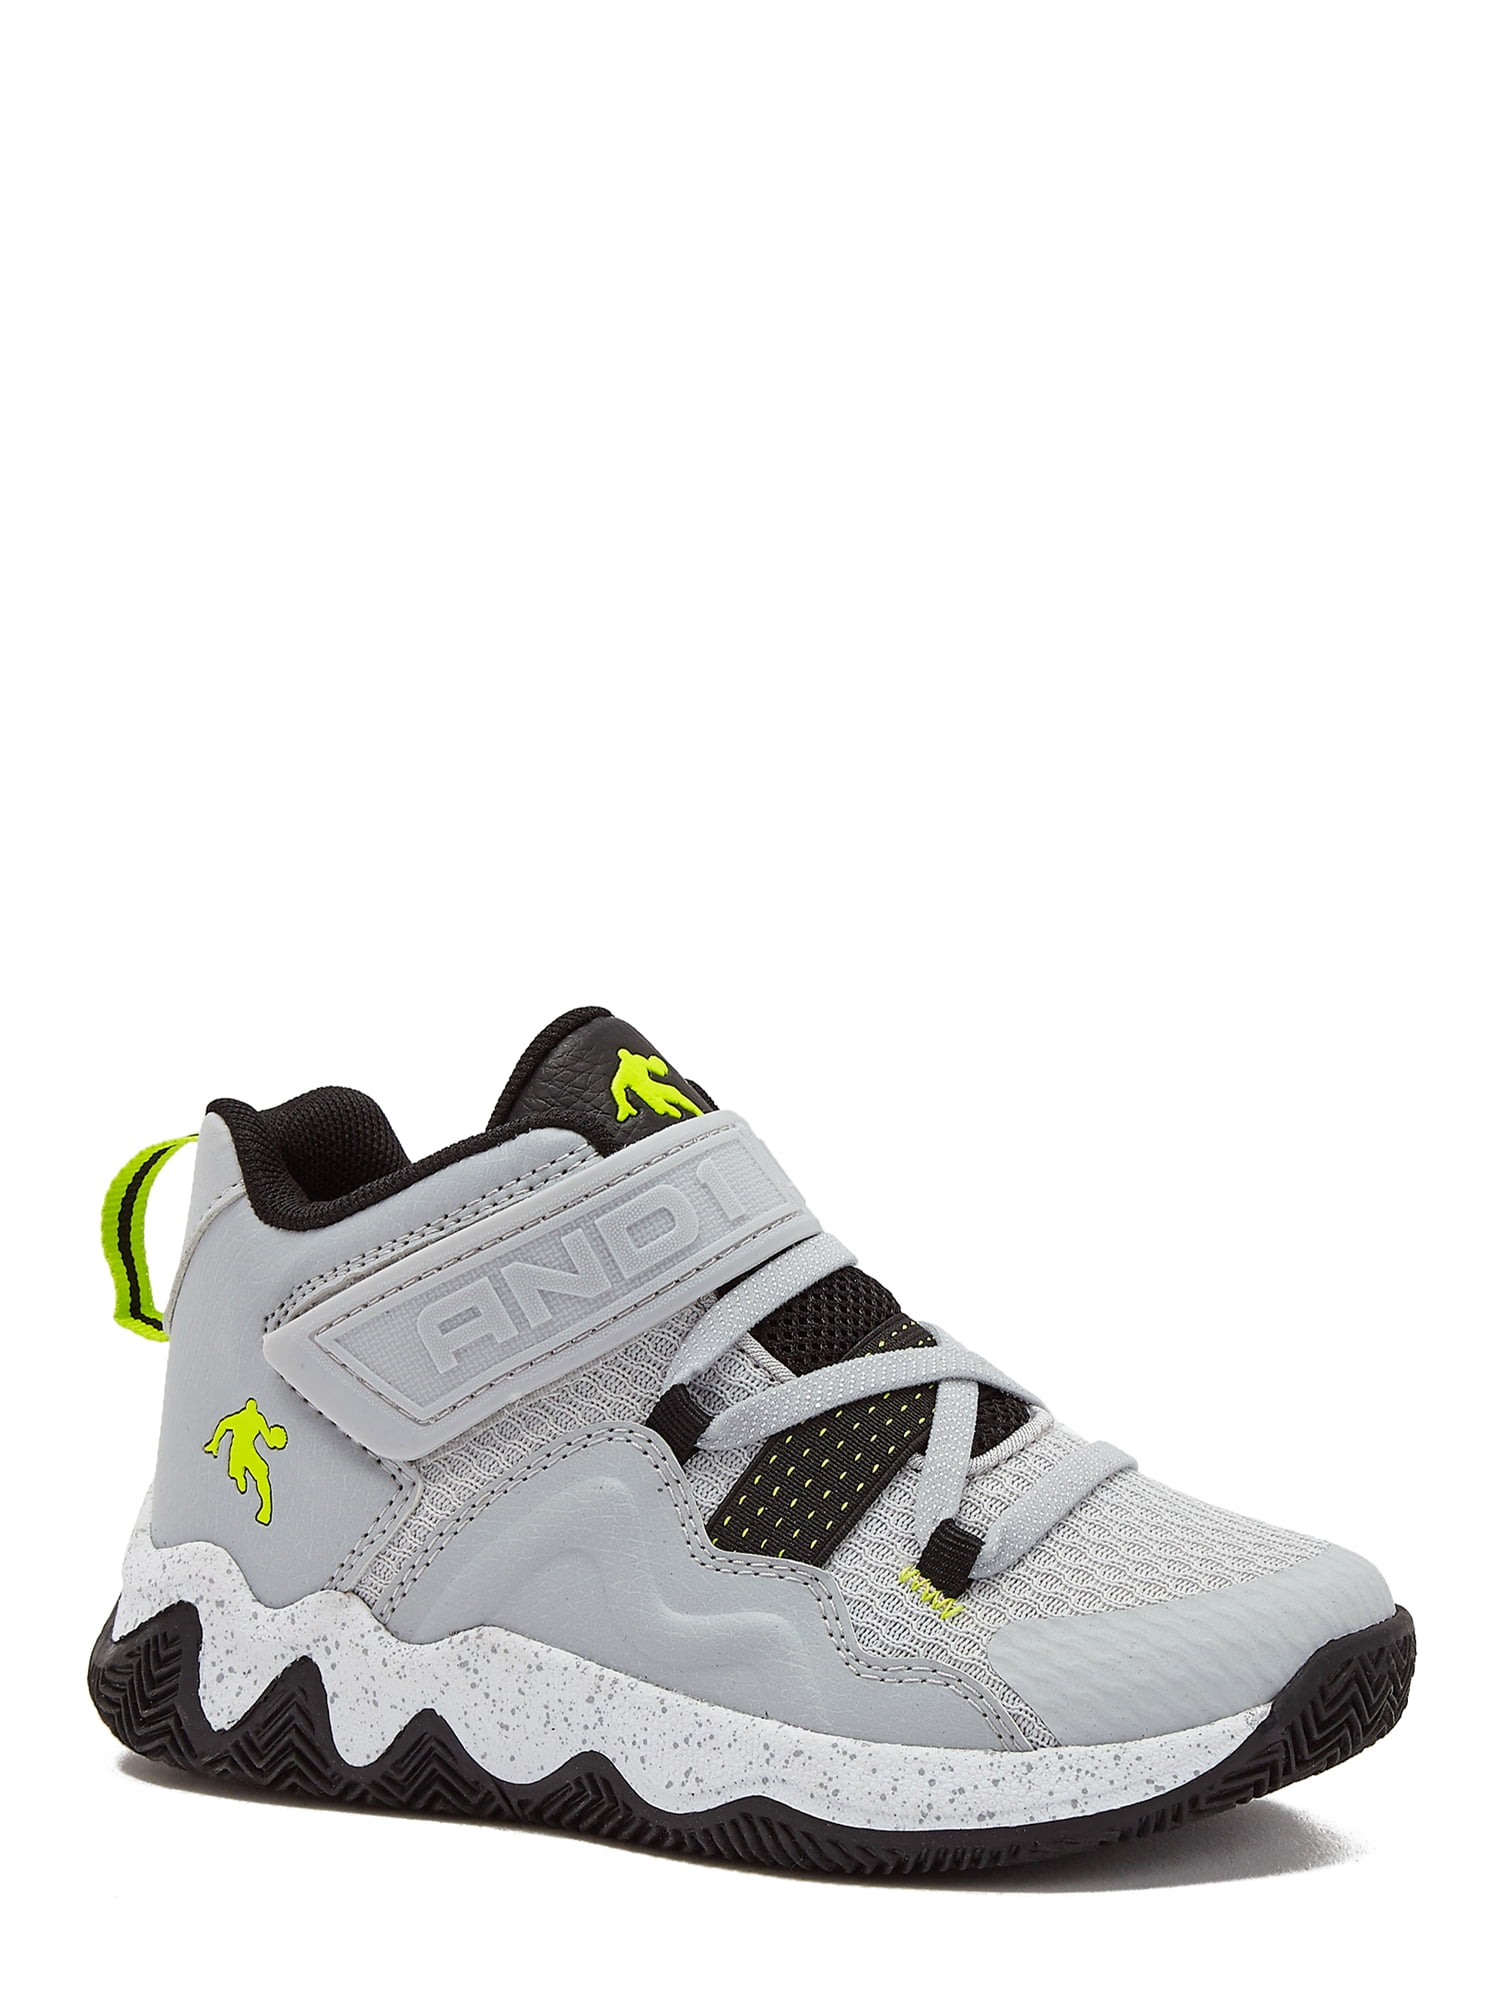 AND1 Little & Big Boys Strap Basketball Sneakers, Sizes 13-6